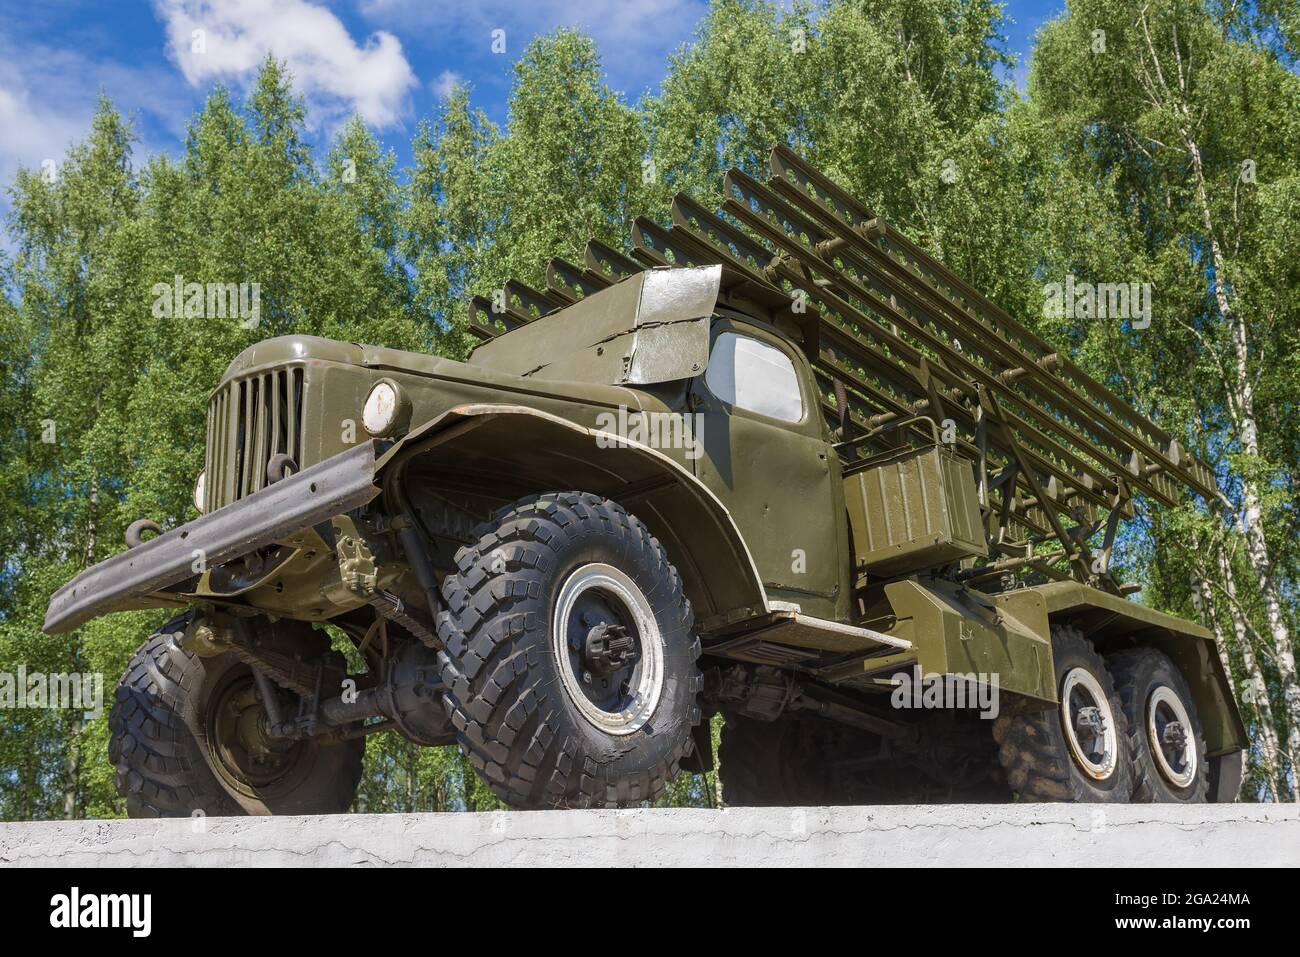 VELIZH, RUSSIA - JULY 04, 2021: Rocket installation of a salvo fire system based on the ZIL-157K truck close-up Stock Photo